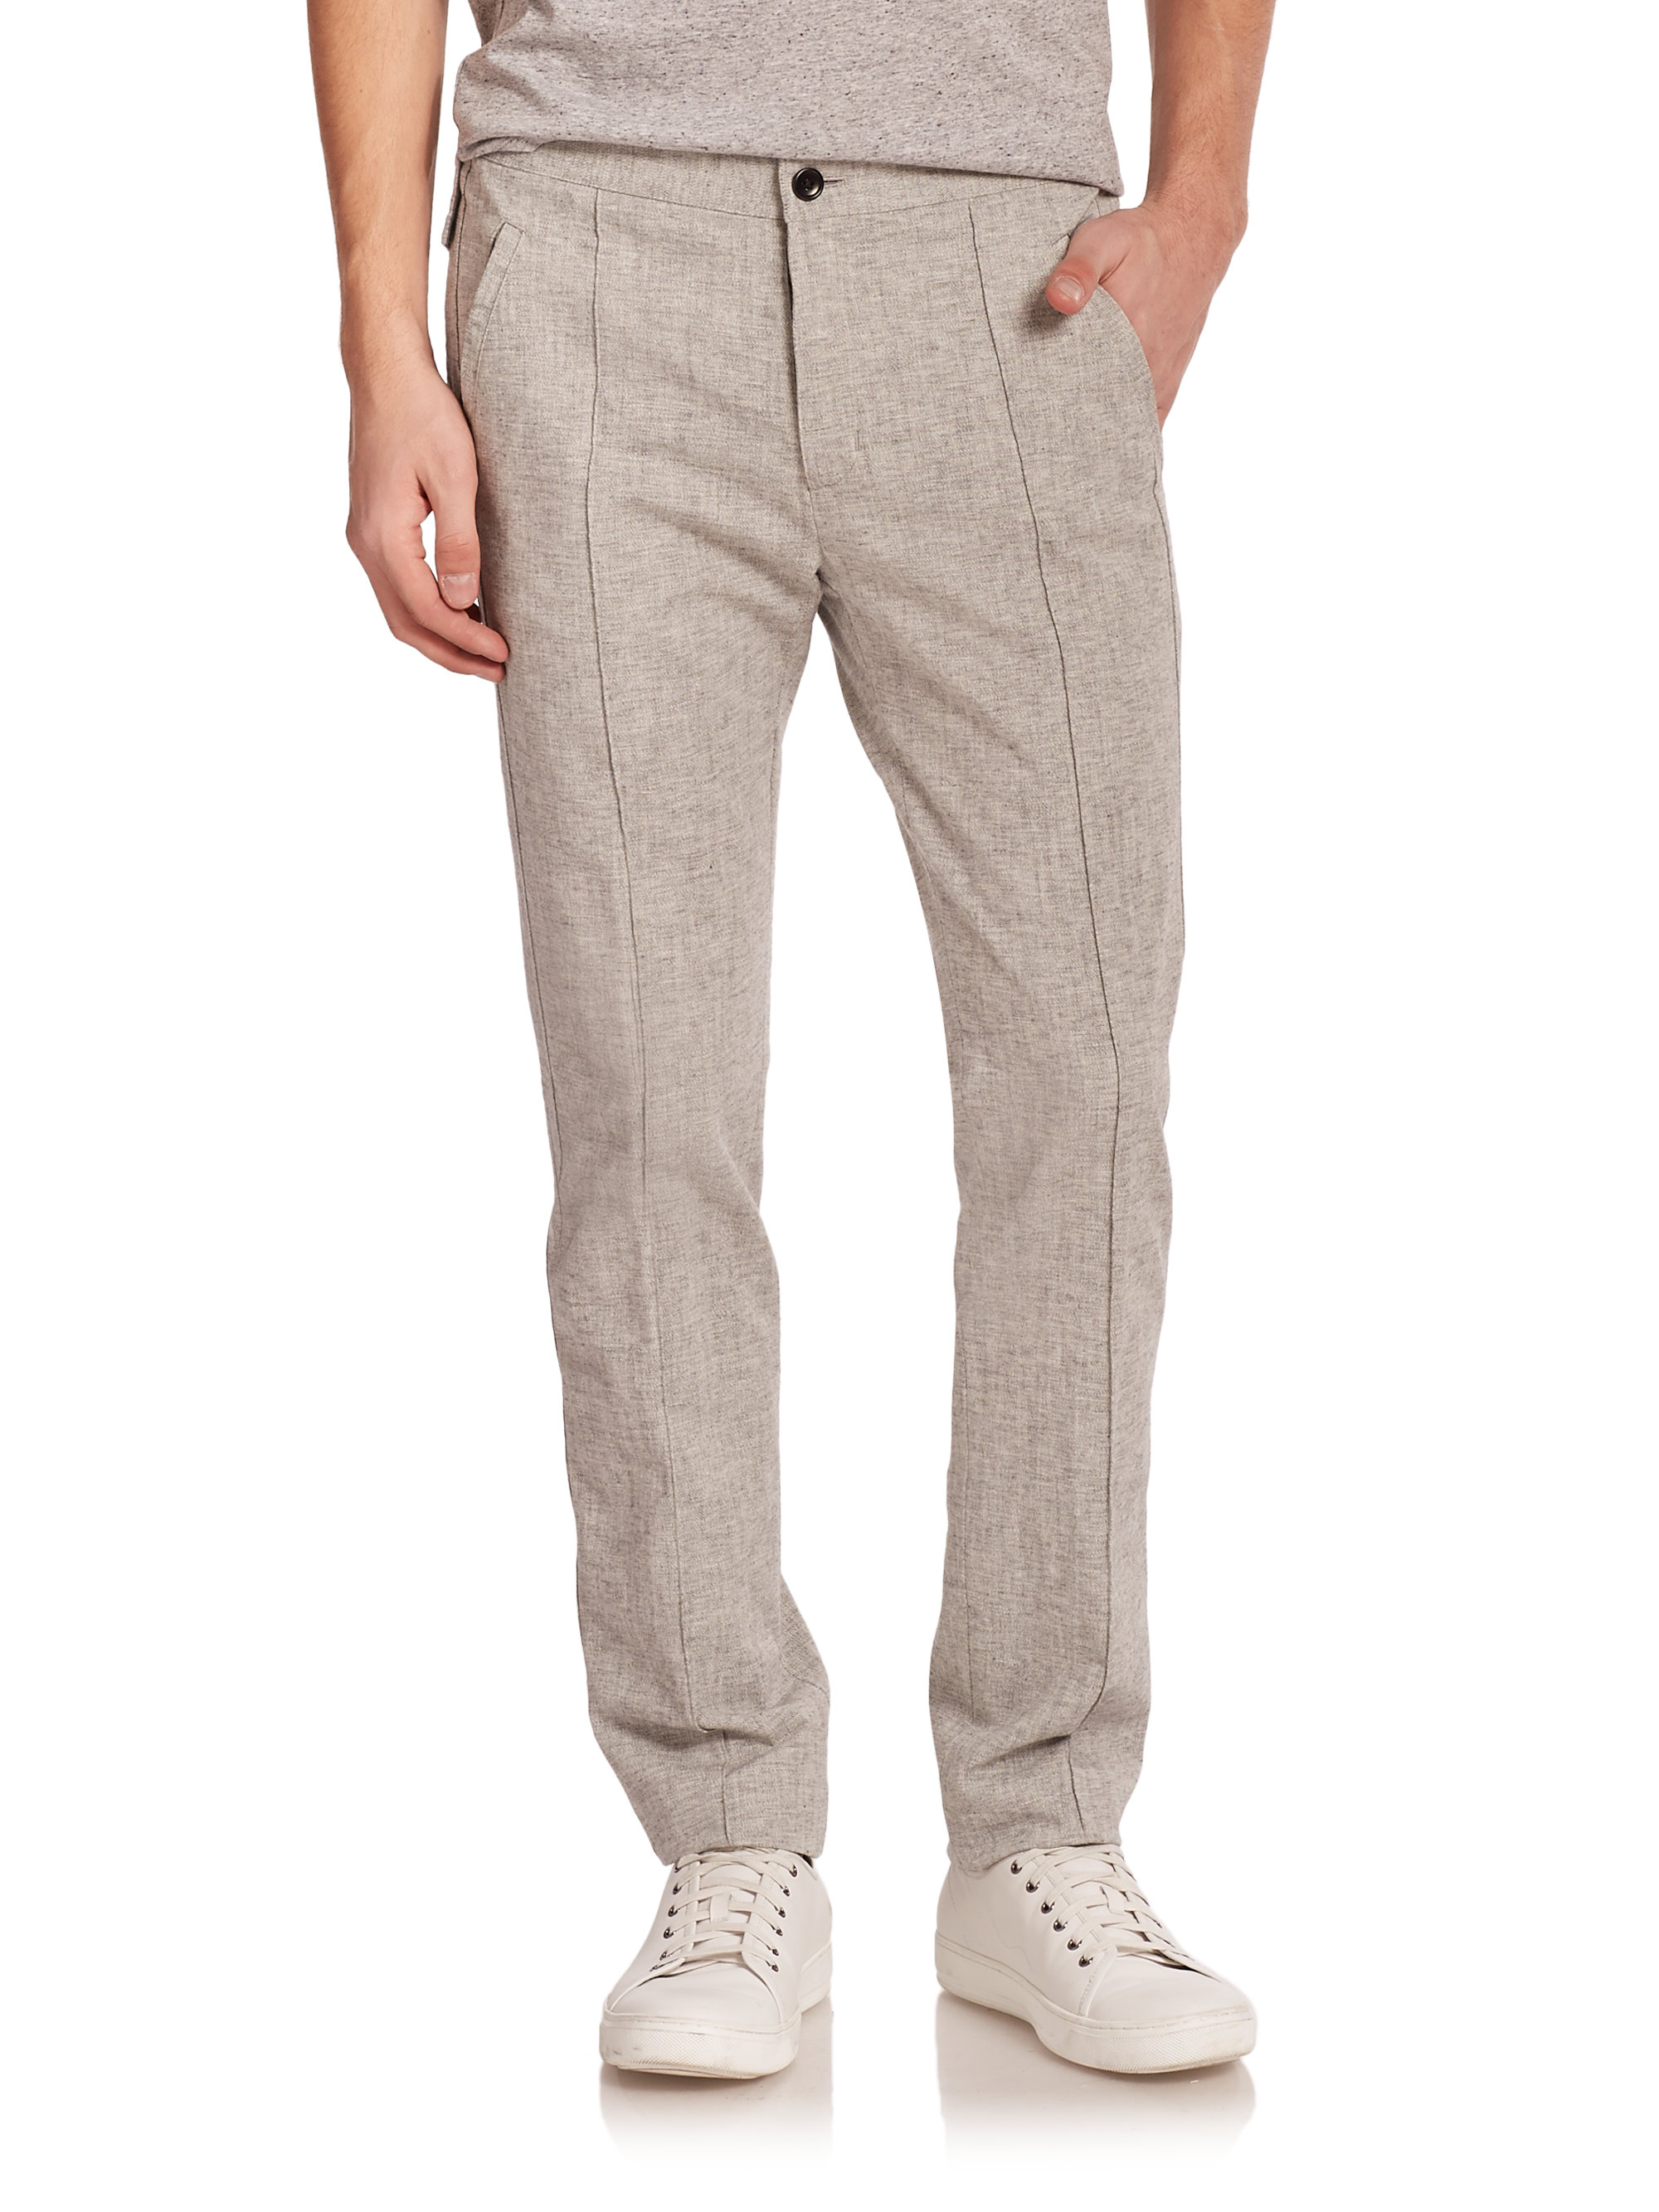 Lyst - Vince Cotton Track Pants in Gray for Men